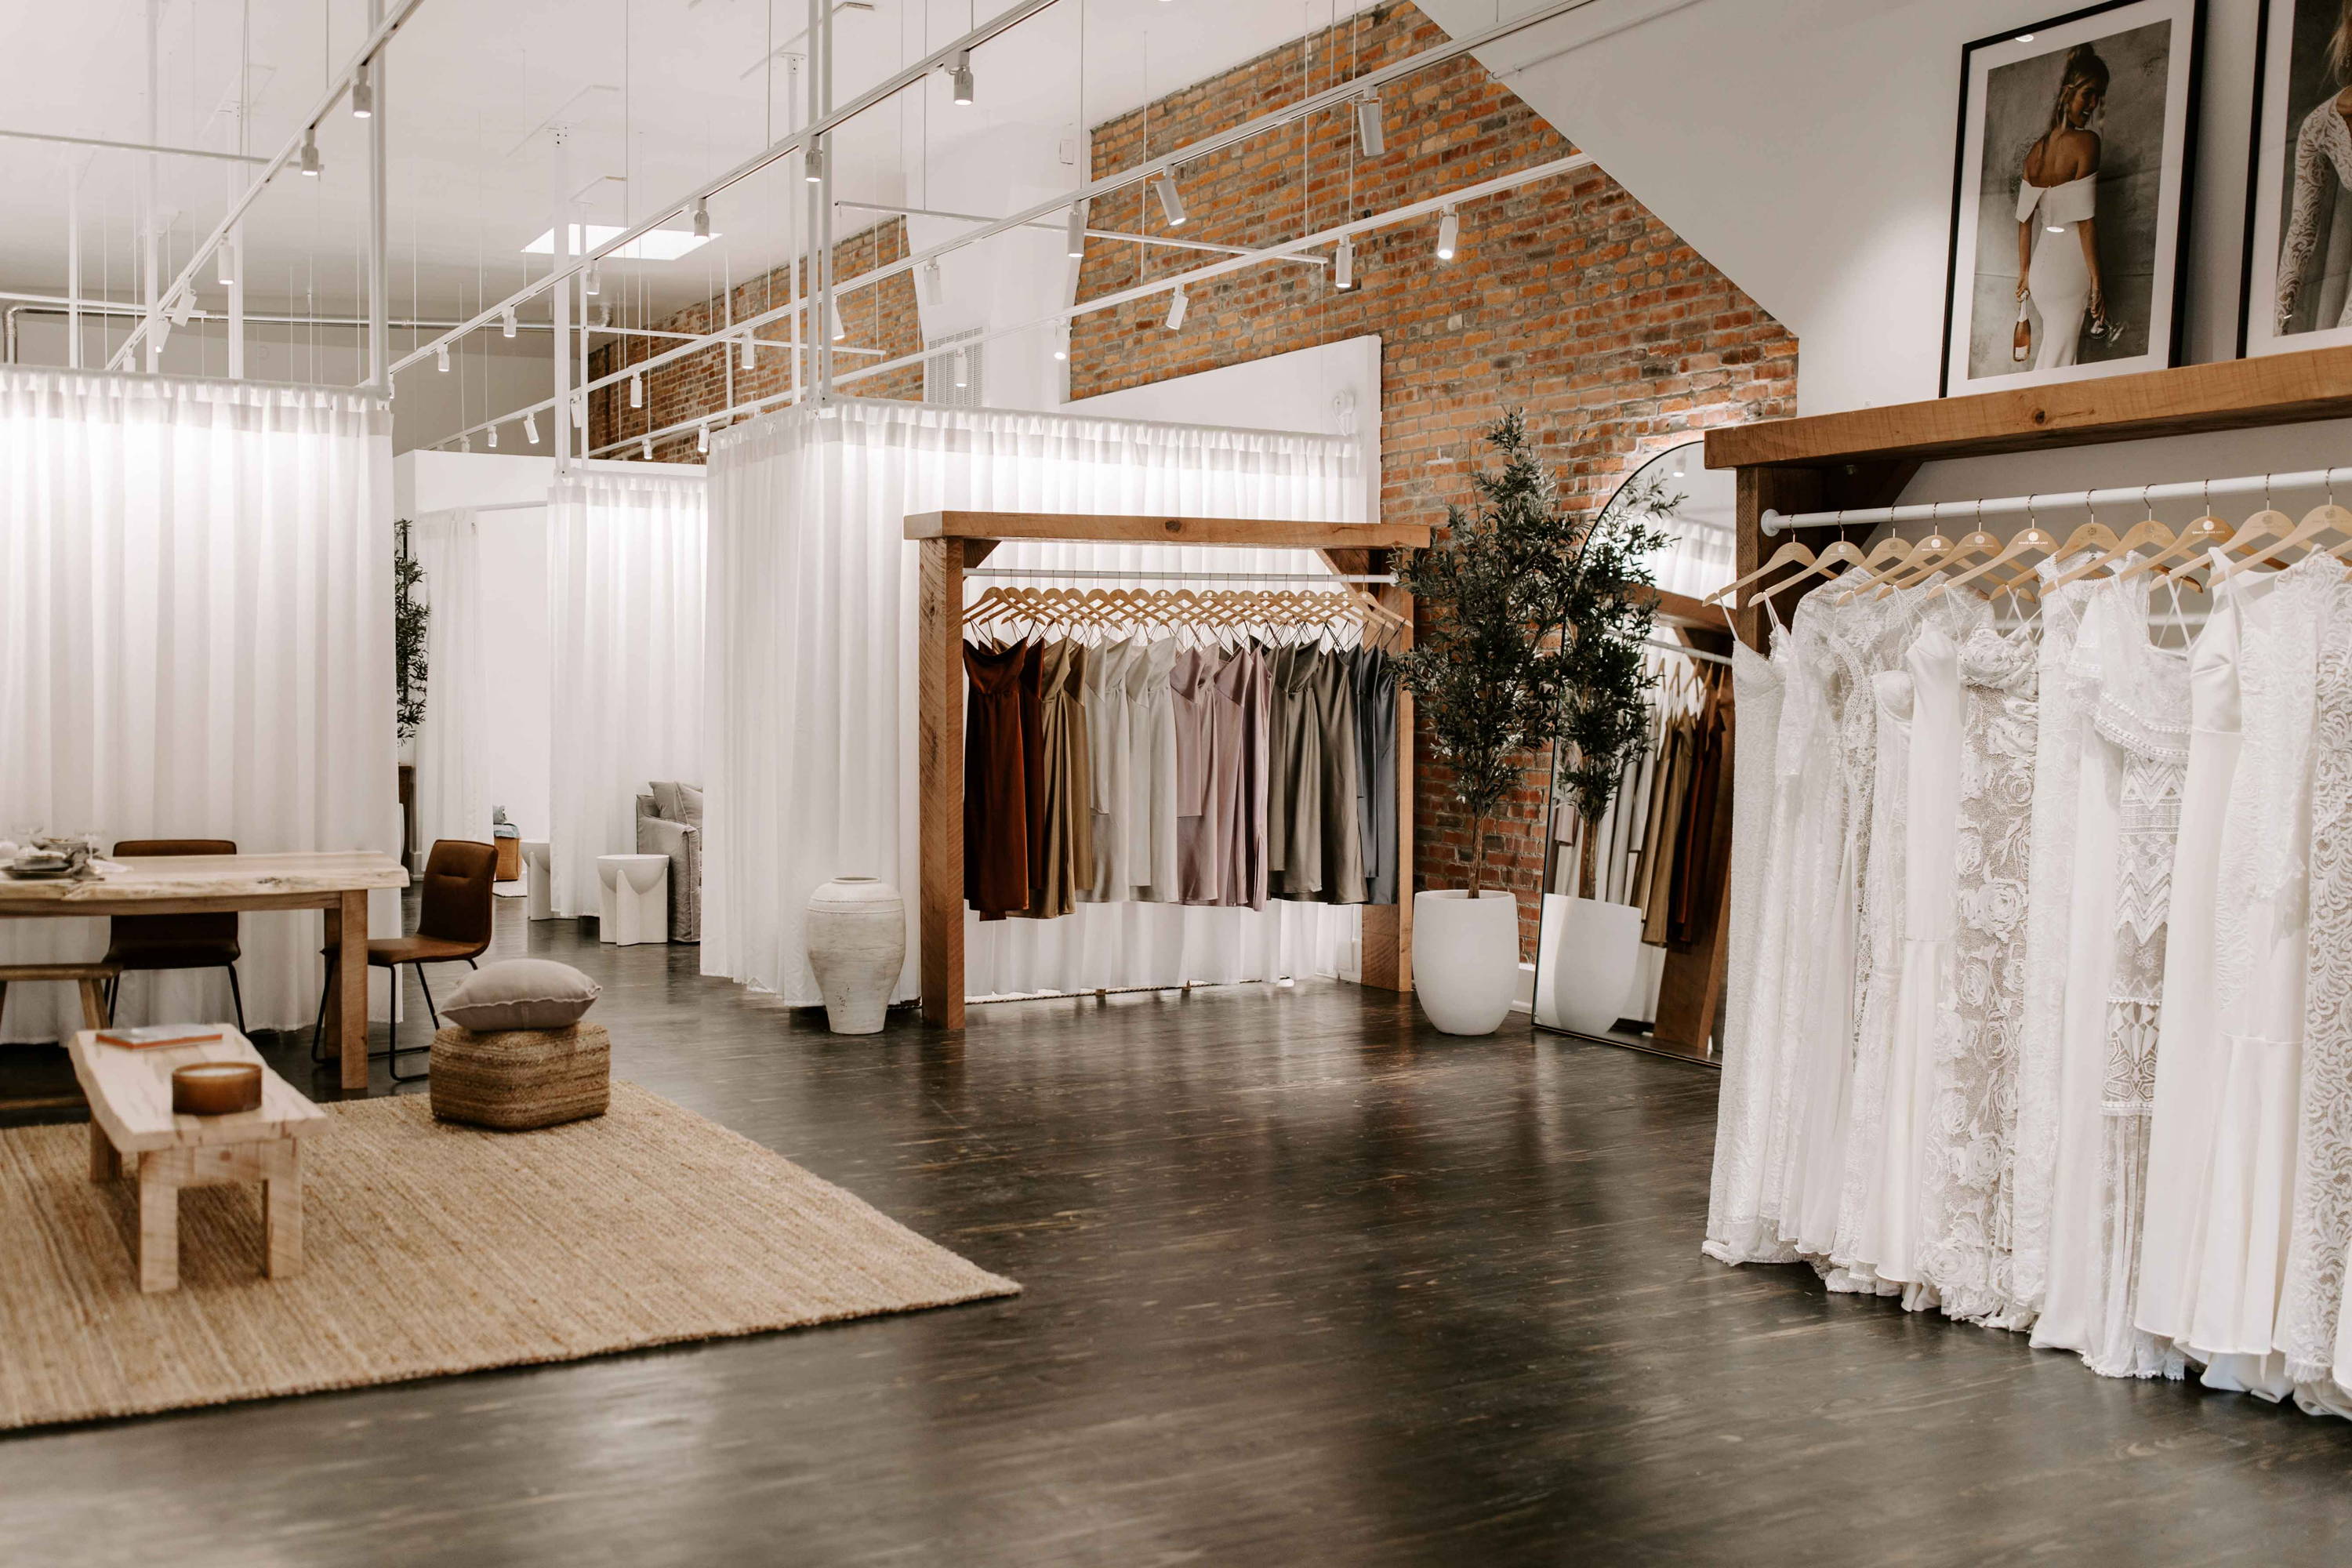 Showroom with bridesmaids and wedding dresses